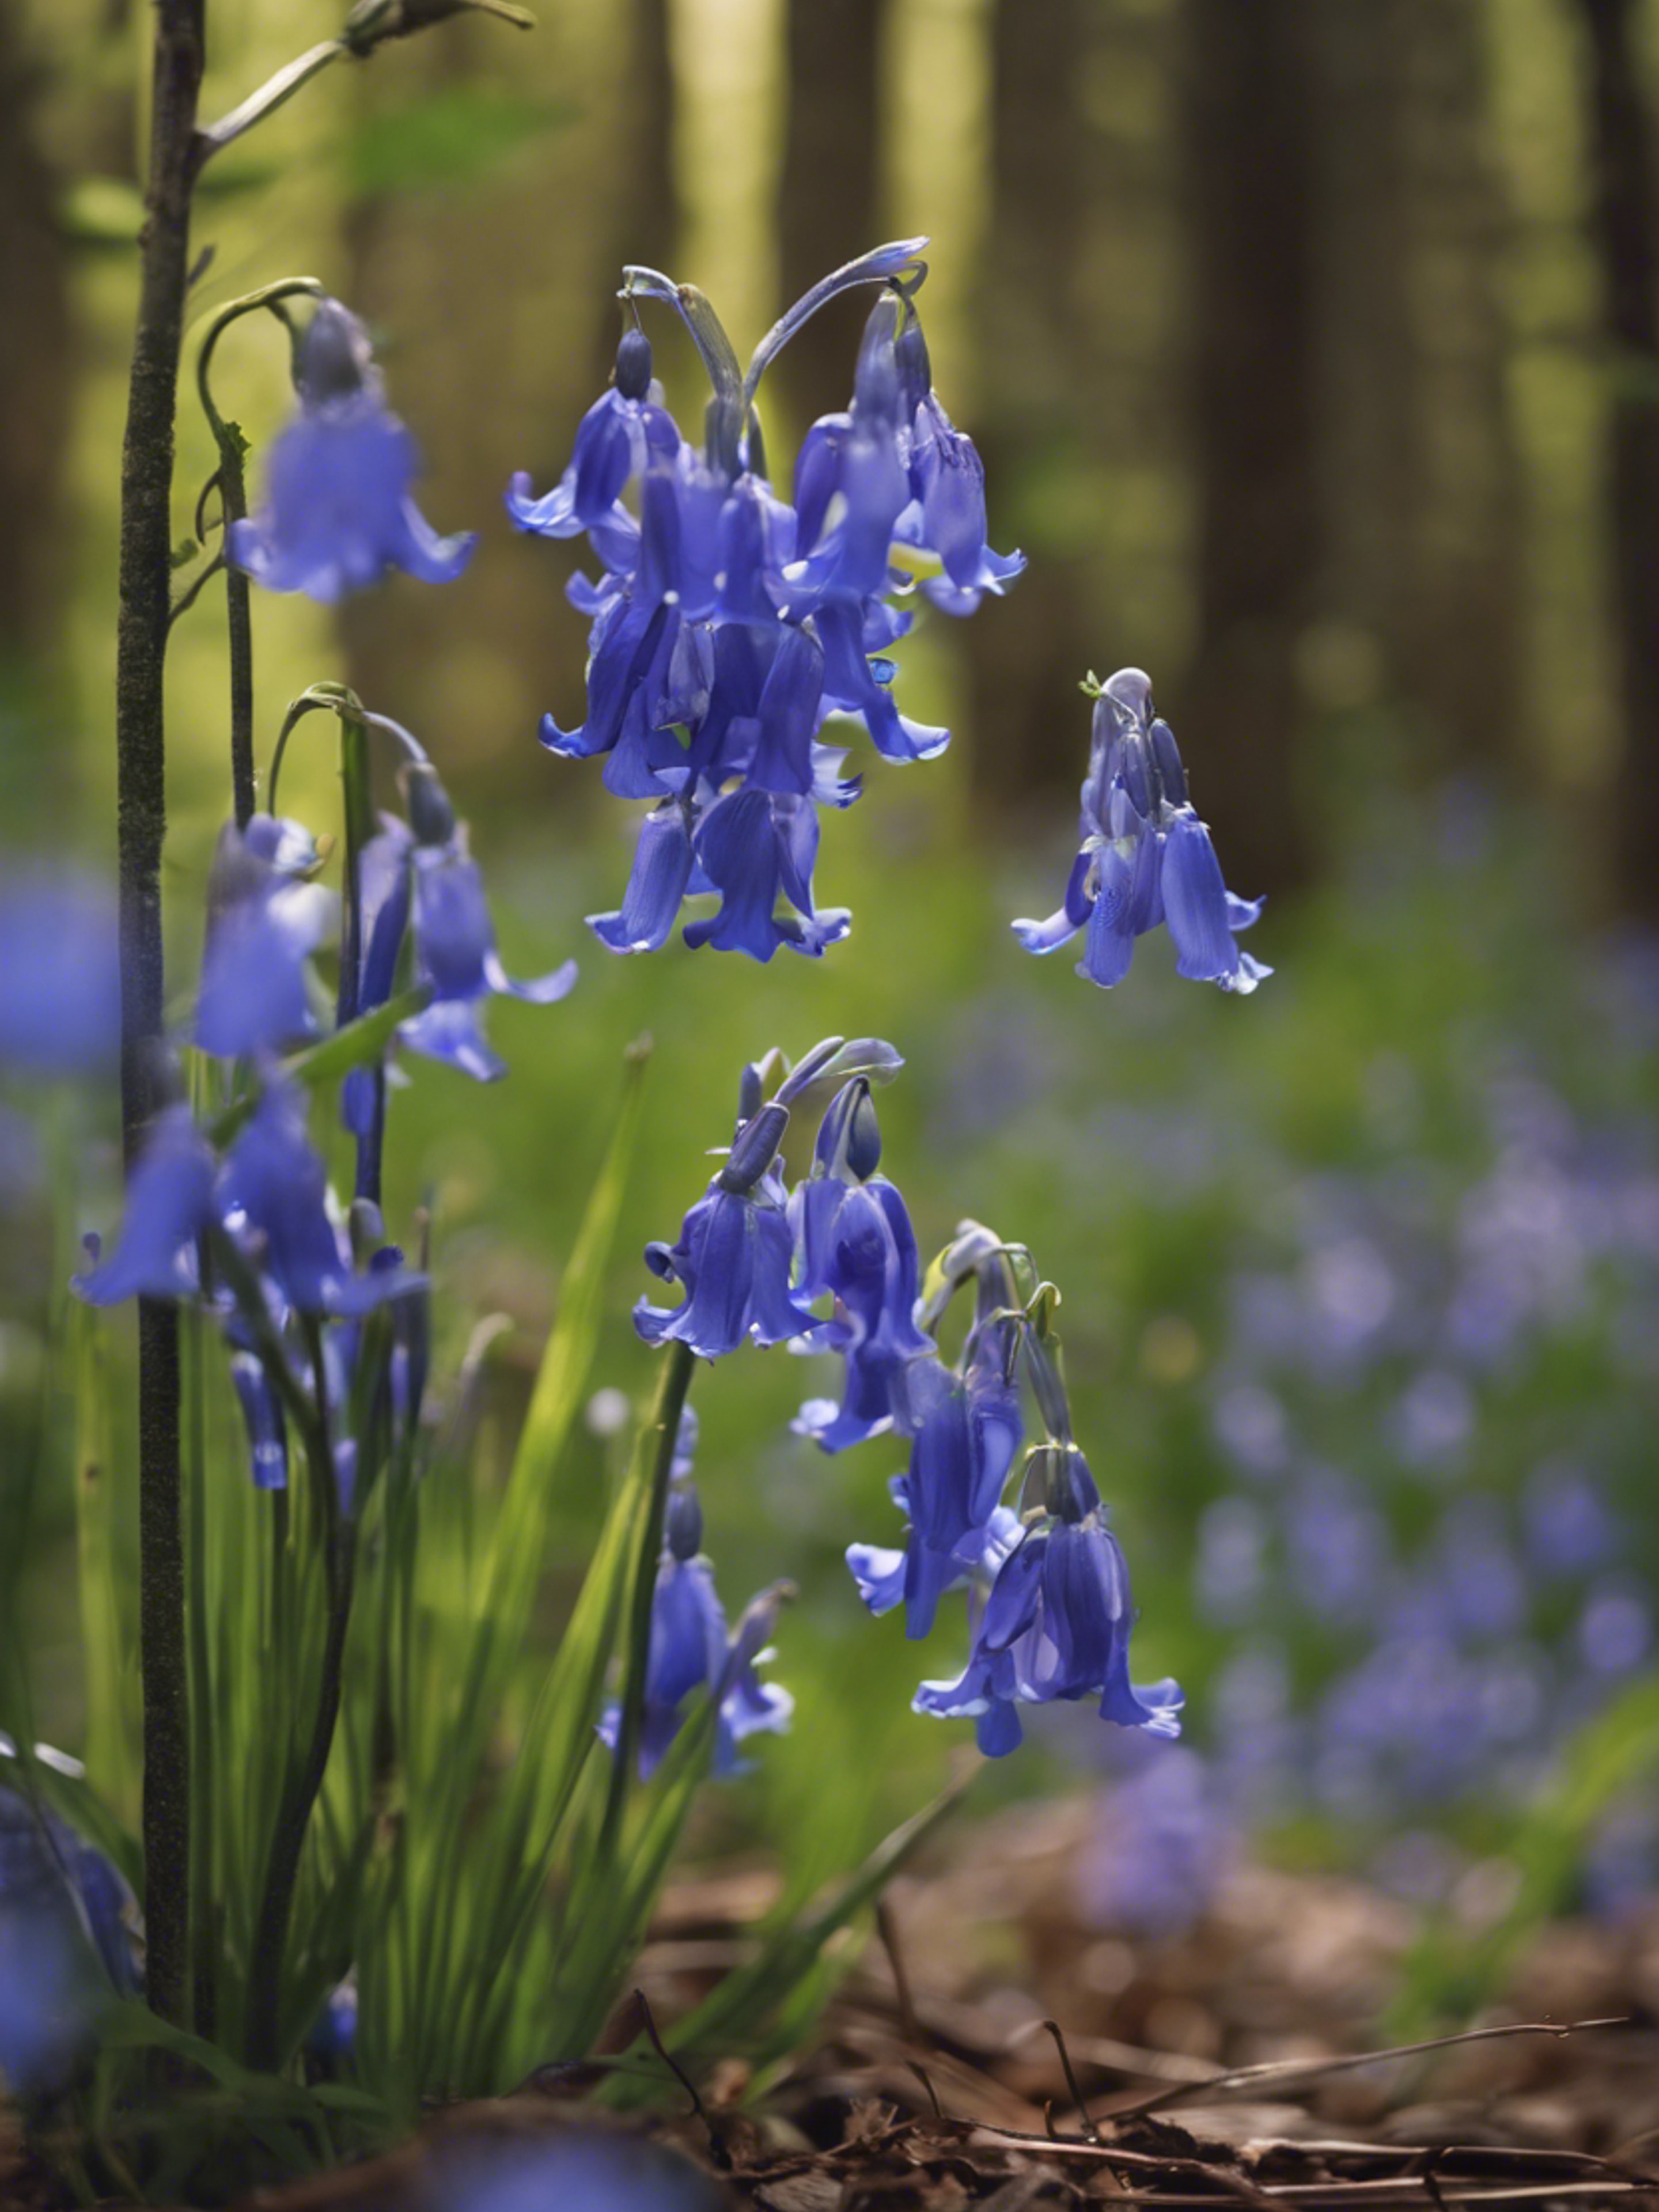 A cluster of bluebells growing in the heart of a dense, untouched forest. Tapet[e9ac2ad9f62f40e2a0af]